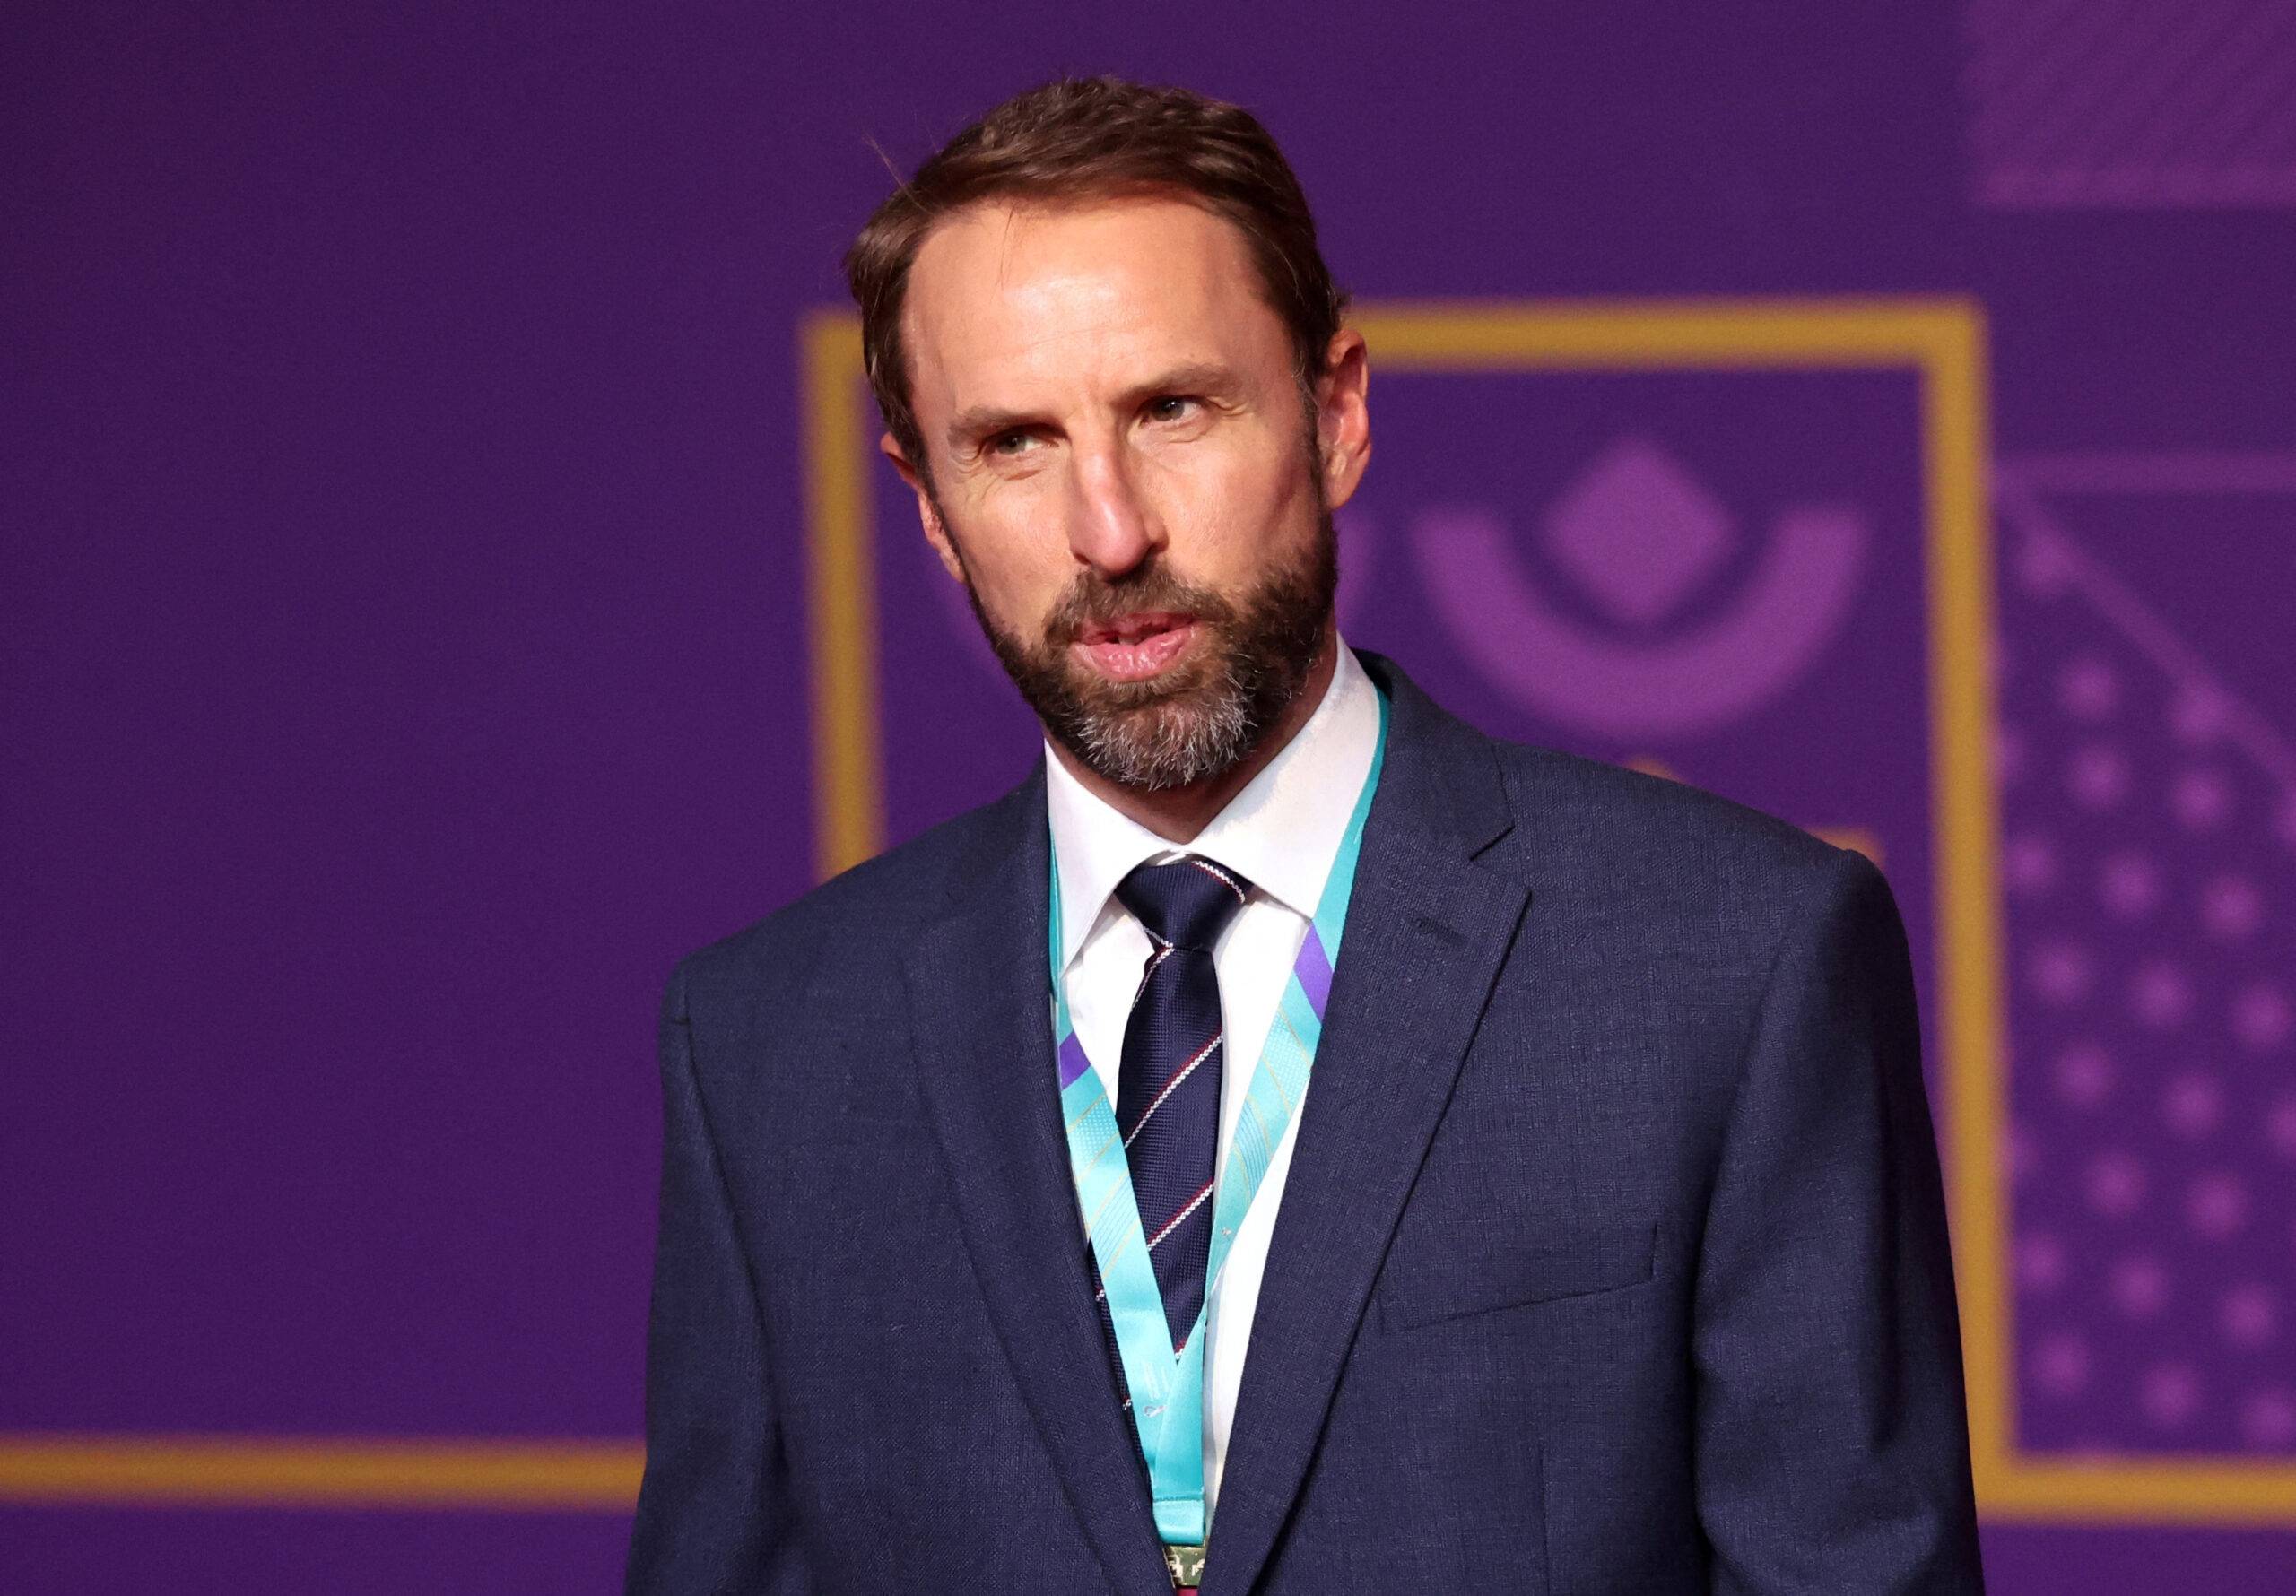 Southgate at the 2022 World Cup draw.